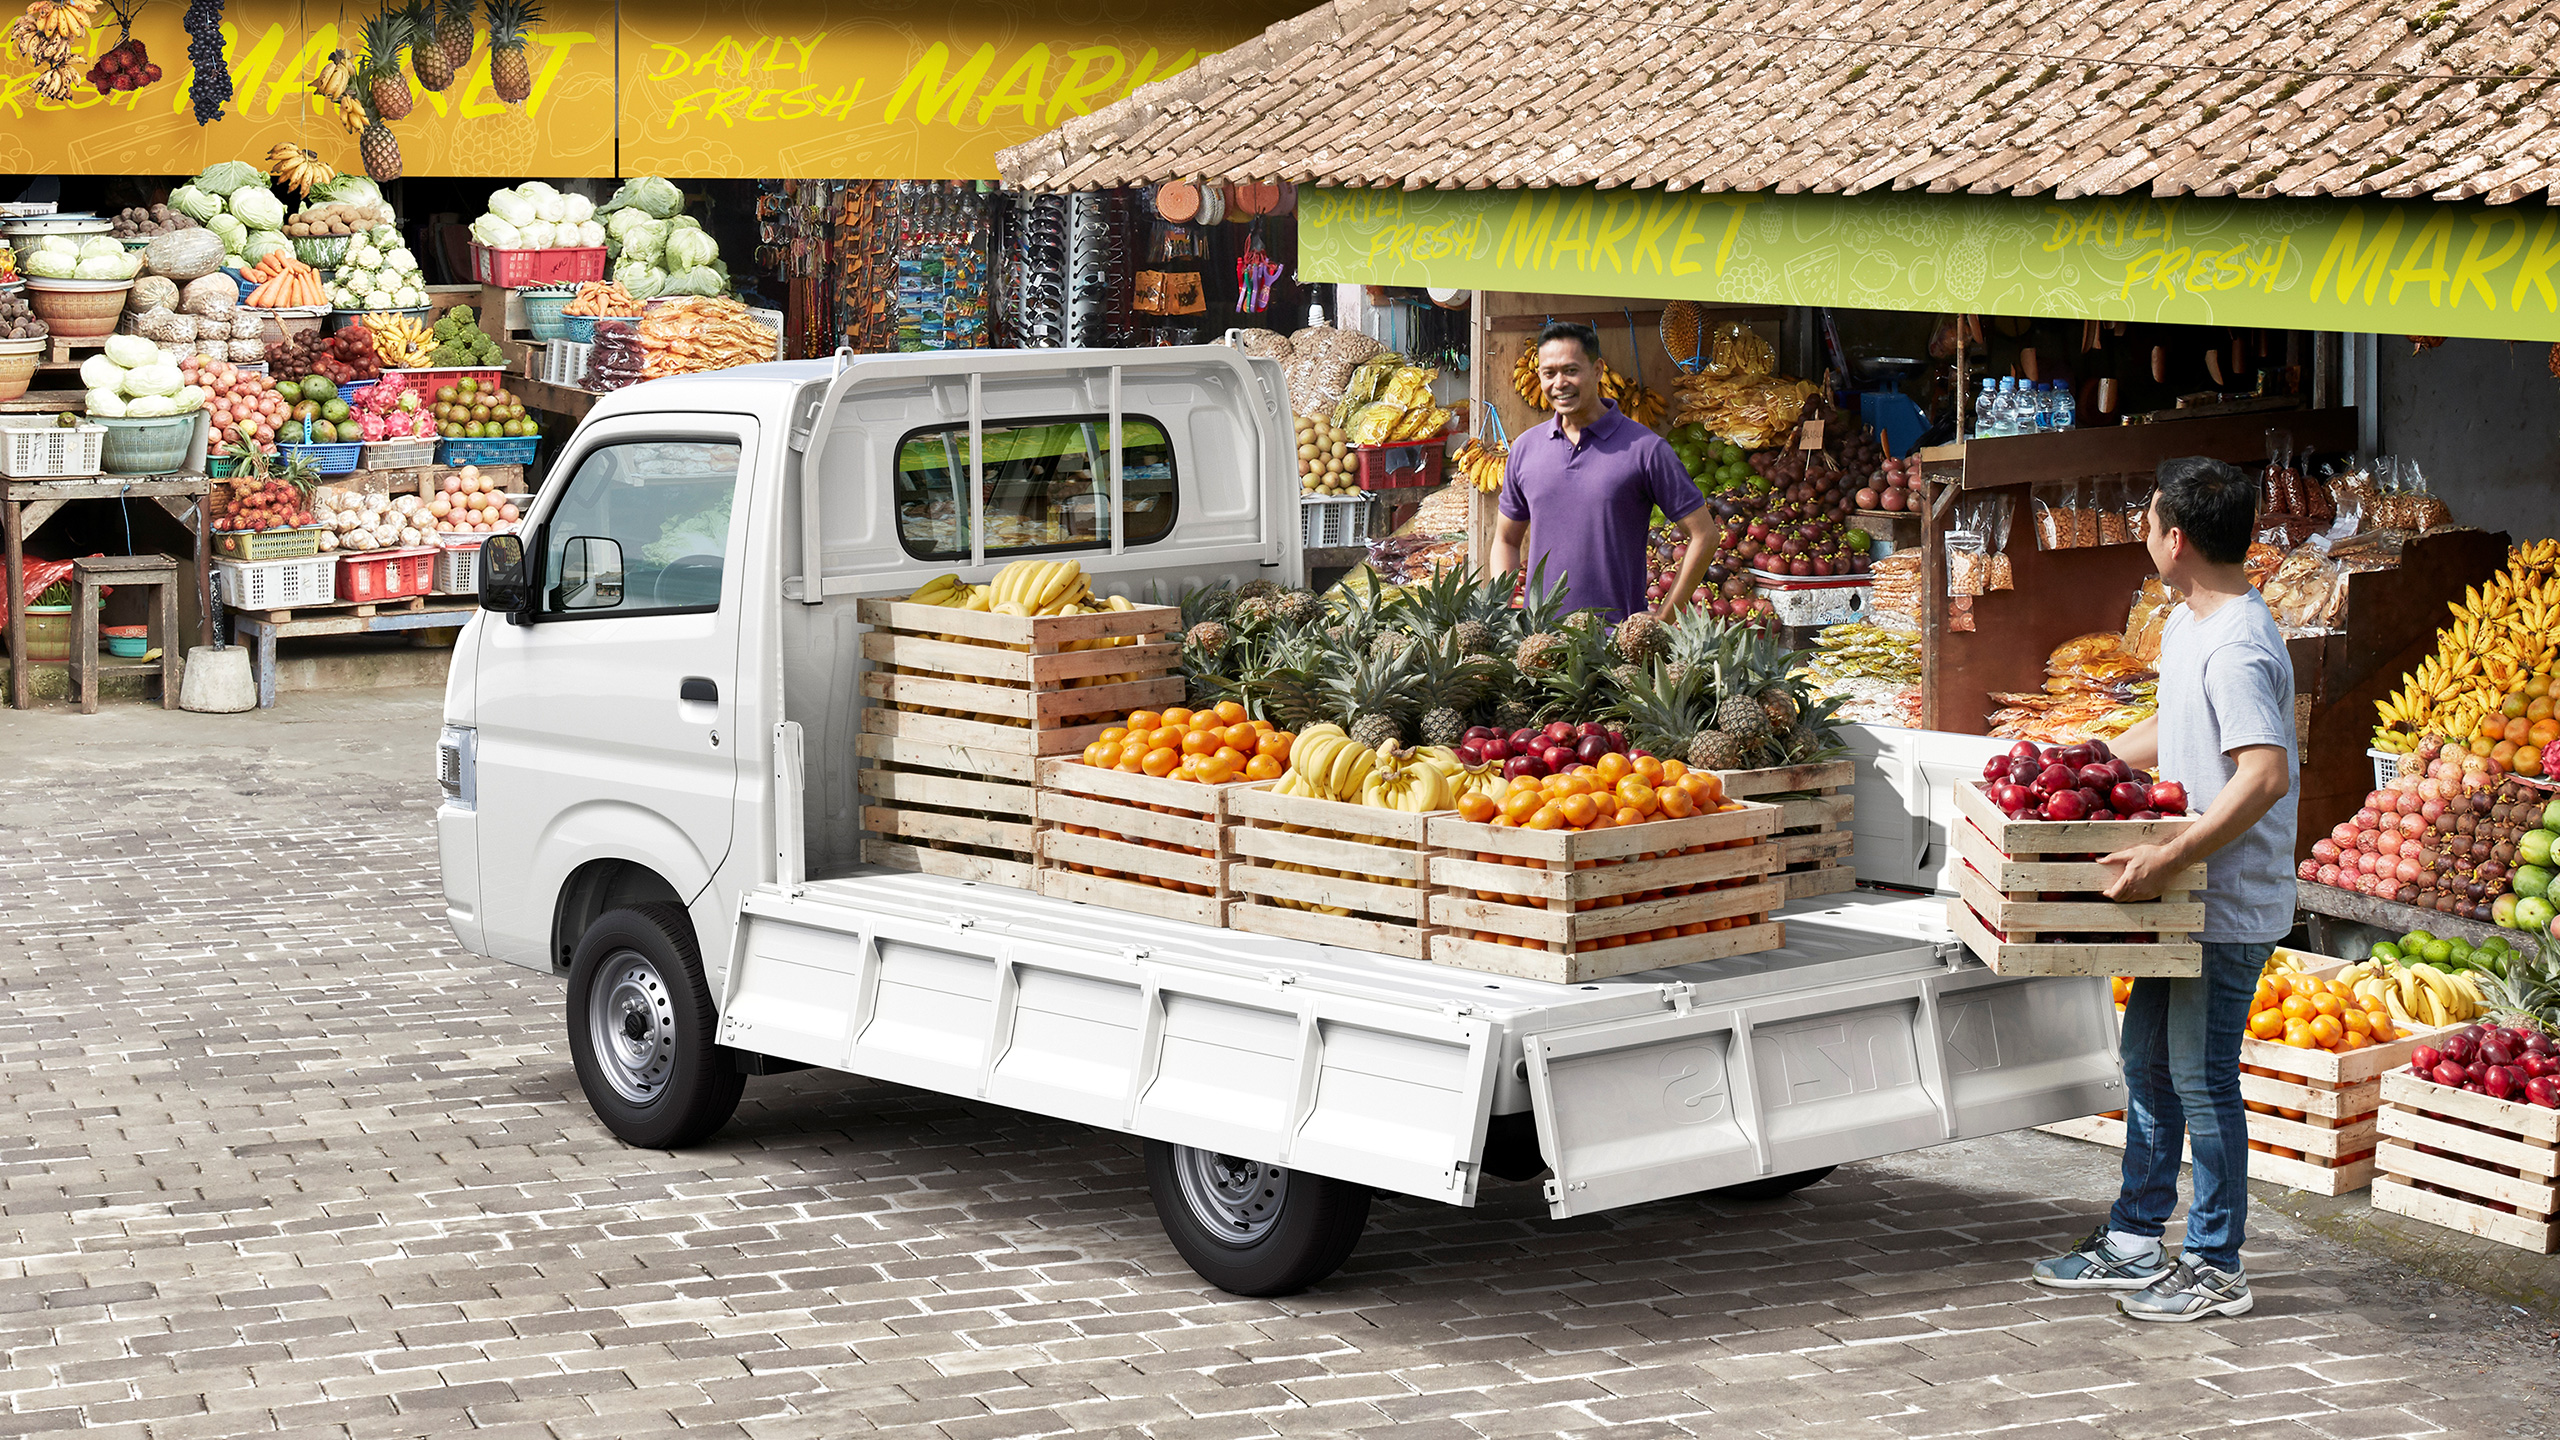 Carry-parked-in-front-of-the-fruit-market-and-a-man-is-loading-many-kinds-of-fruit-on-its-bed